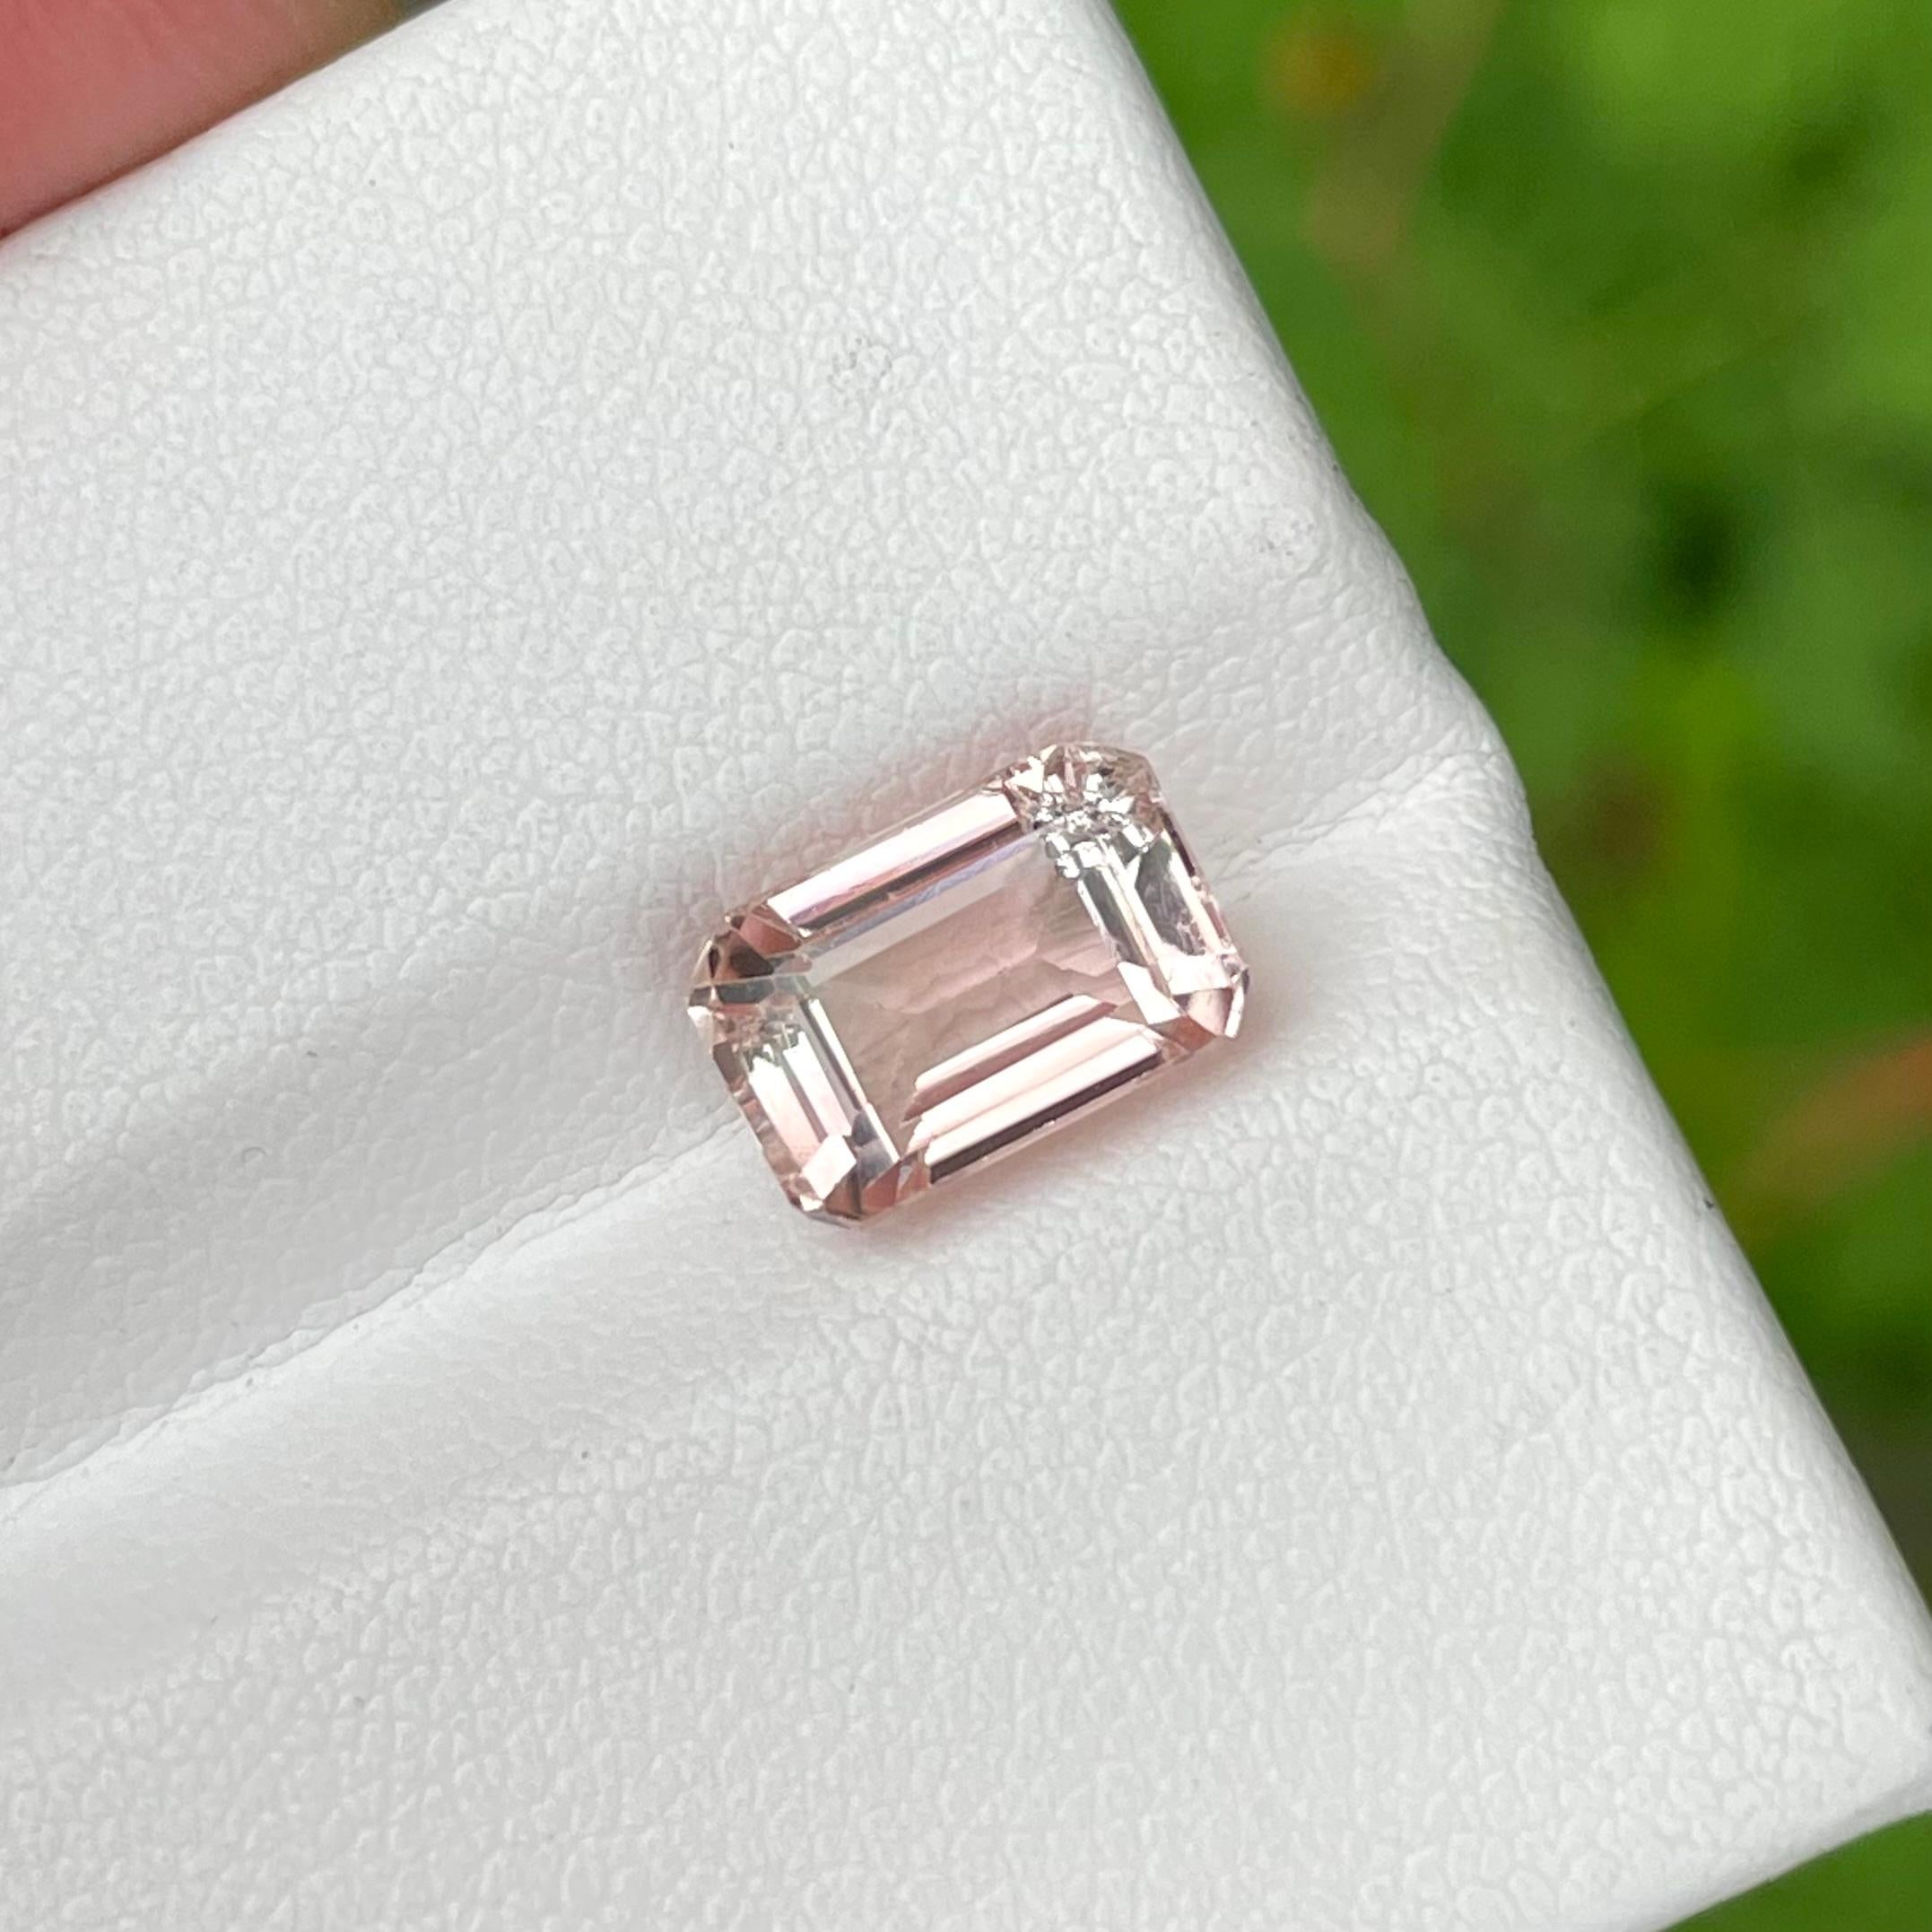 Weight 2.90 carats 
Dimensions 9.6 x 6.3 x 5.4 mm
Treatment None 
Origin Afghanistan 
Clarity VVS (Very, Very Slightly Included)
Shape Octagon
Cut Emerald 



Discover the captivating allure of this Peach Color Tourmaline, a 2.90 carat gemstone of